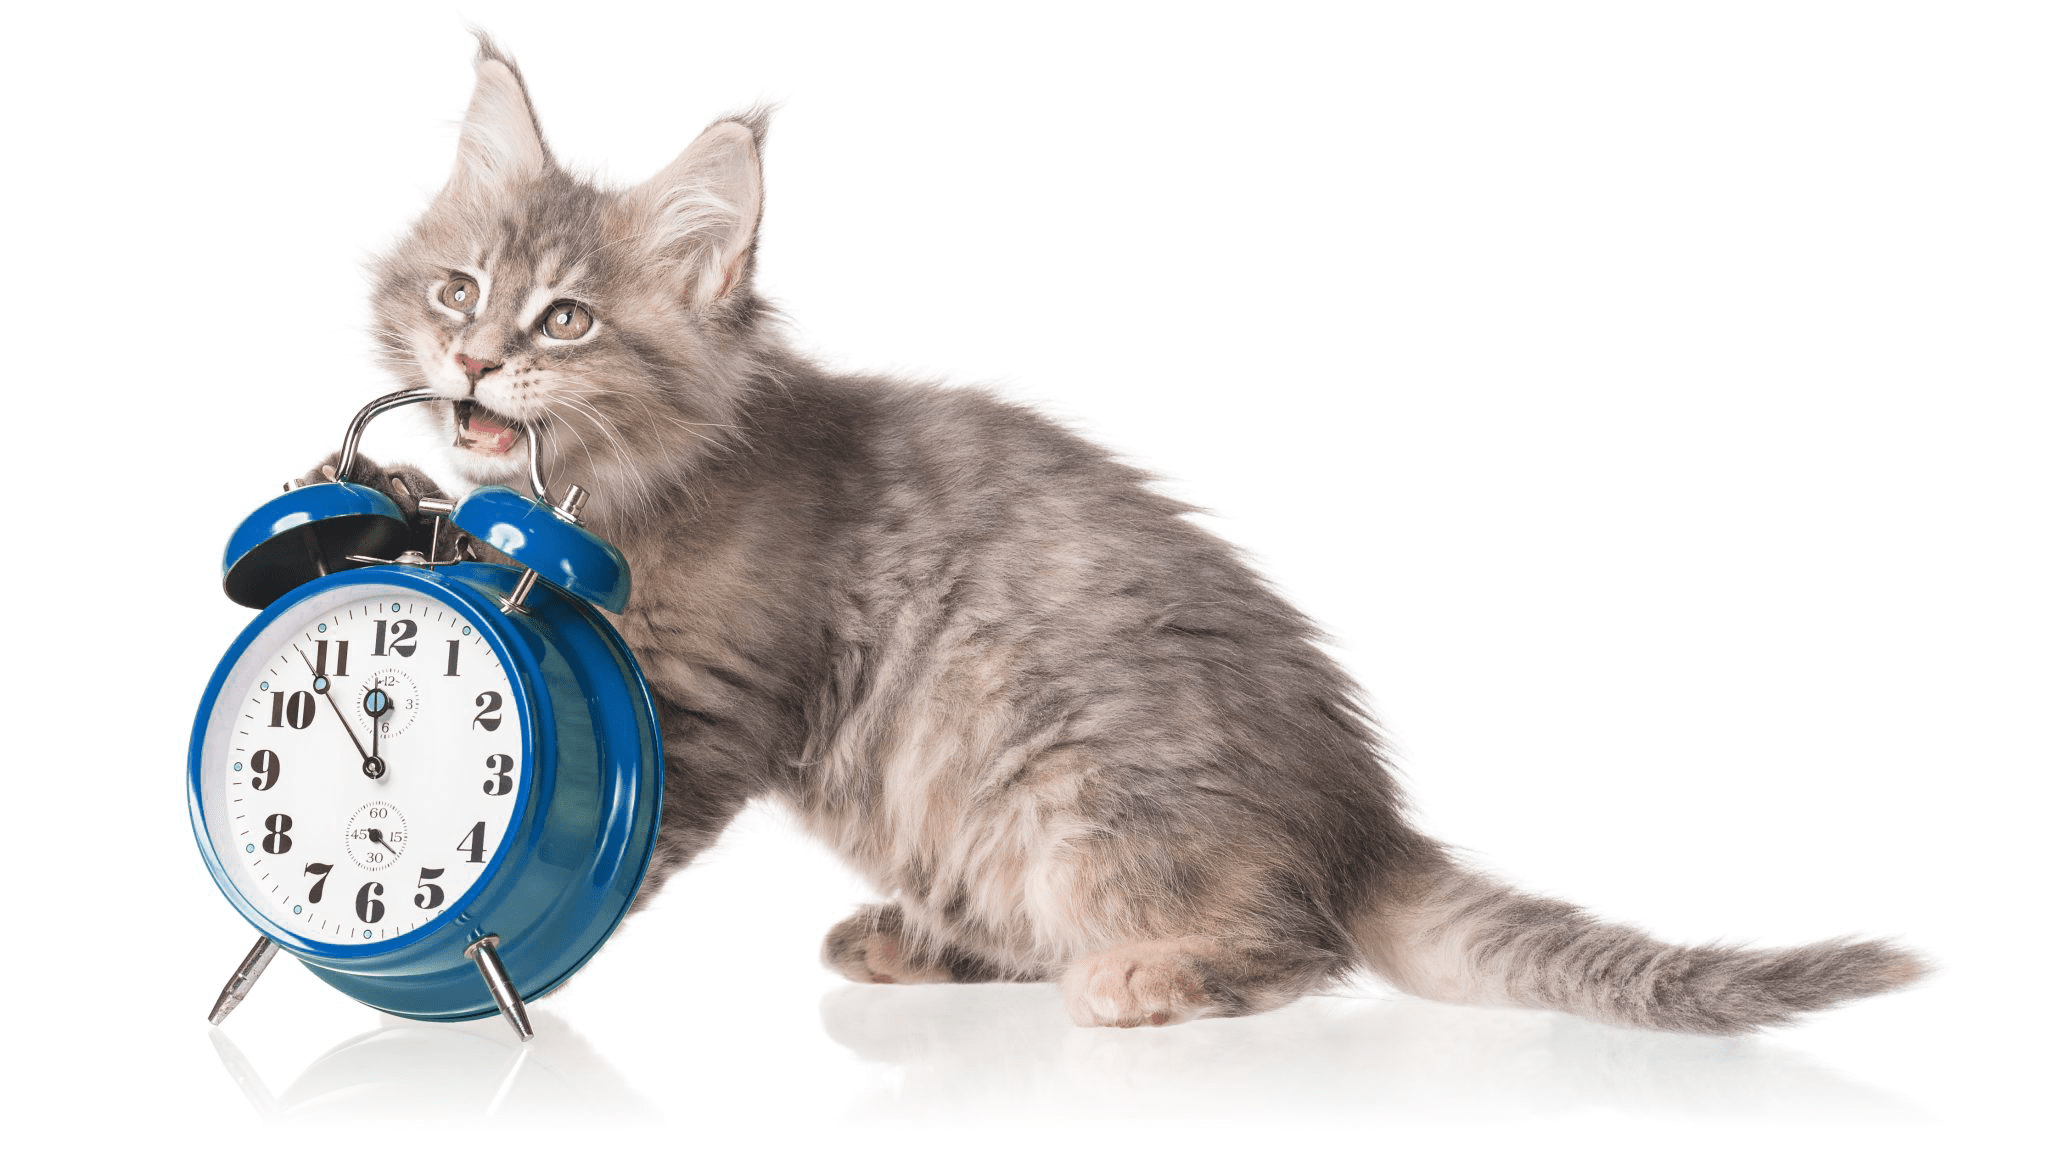 Young kitten holding blue alarm clock